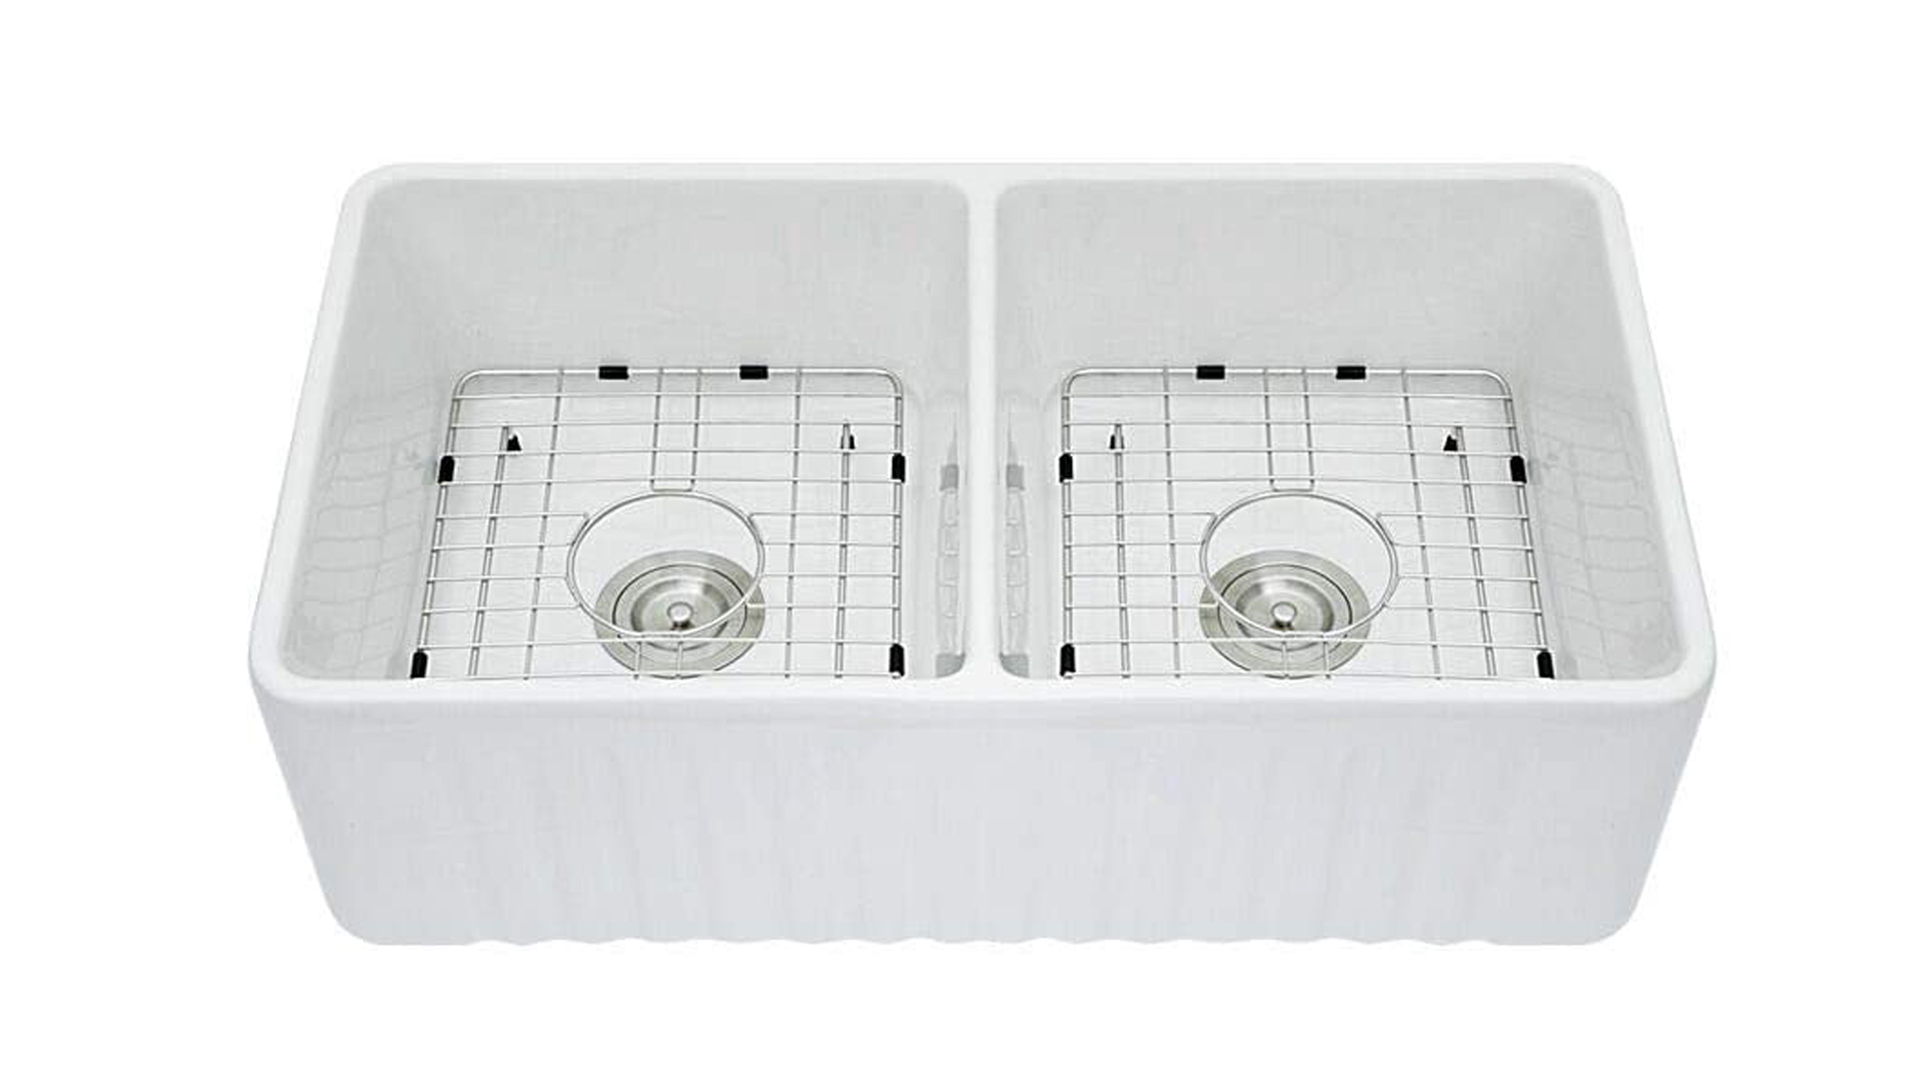 Best Quality Double Bowl Ceramic Kitchen Sink Manufacturers